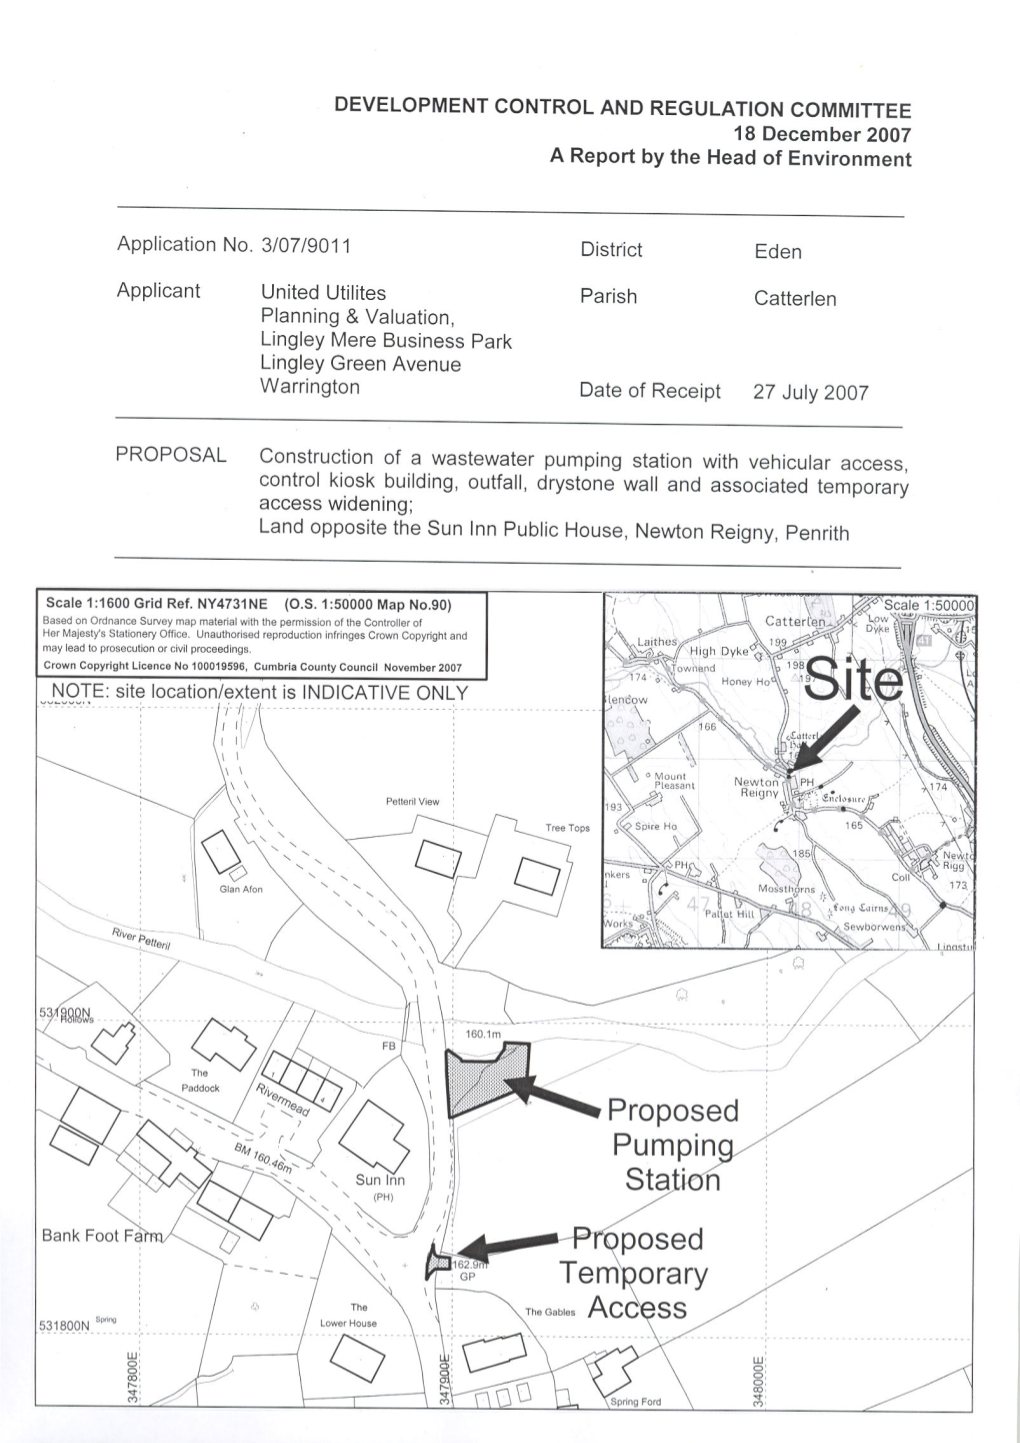 (Item 7) Planning Application No. 3-07-9011 Construction of Wastewater Pumping Station, Newton Reigny, Penrith.Pdf